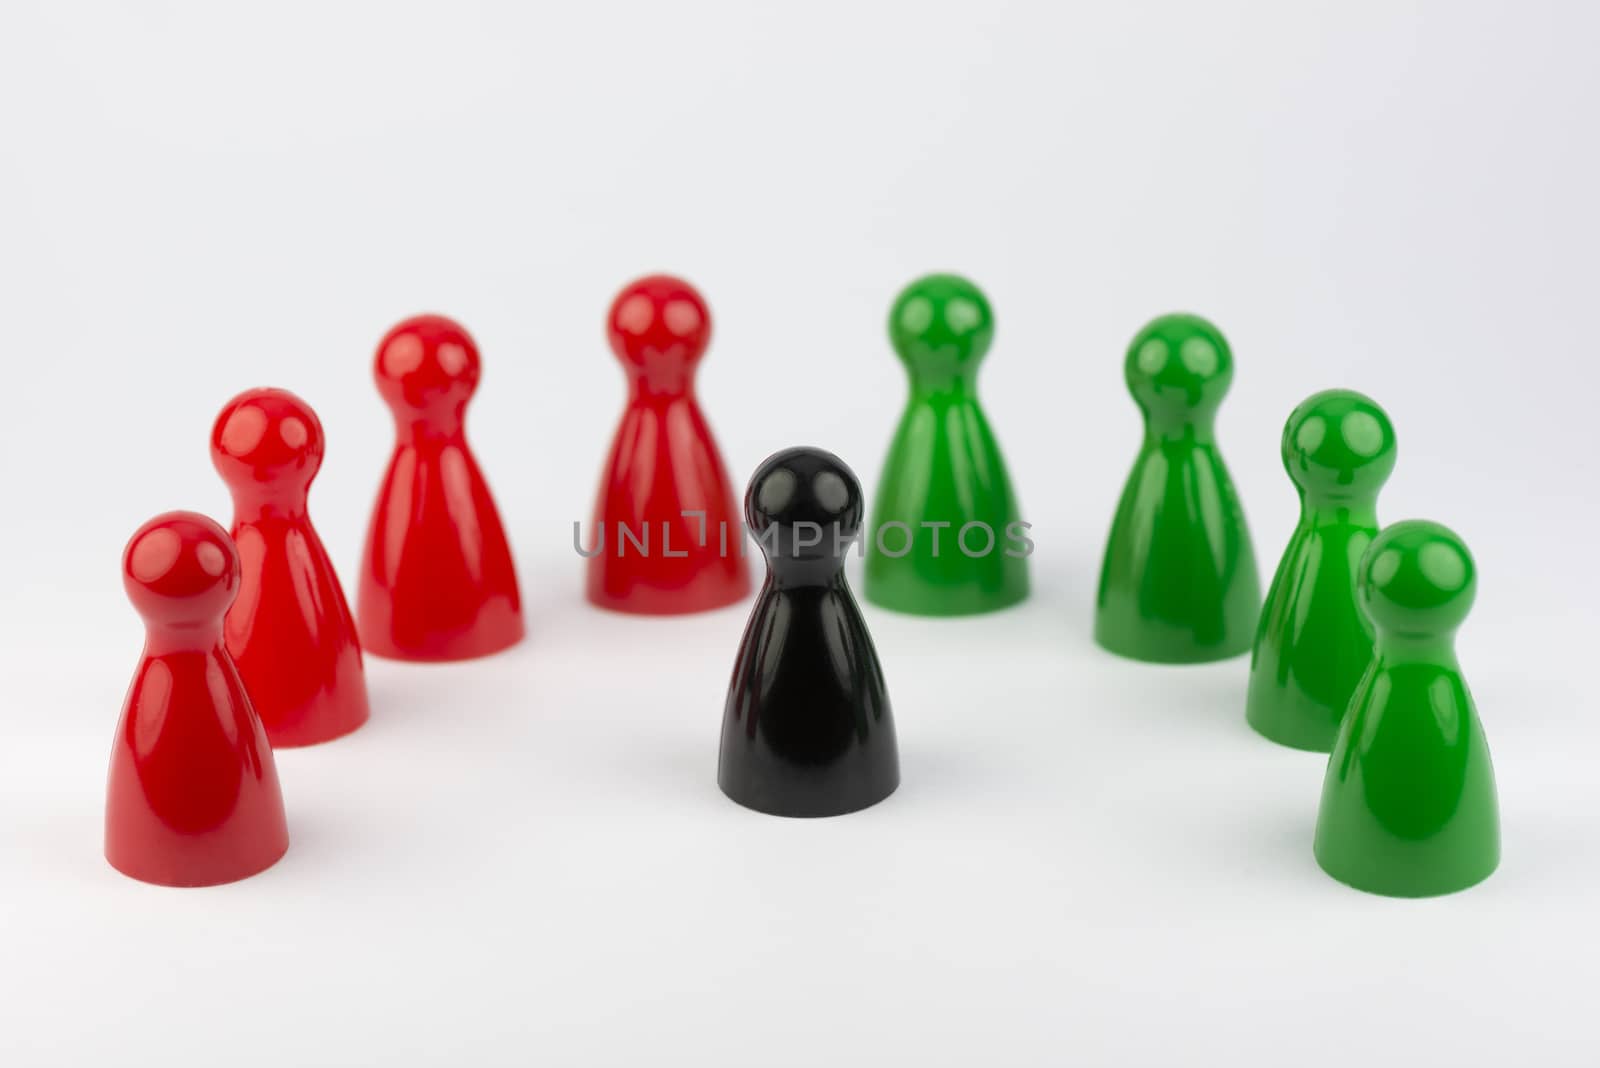 Conceptual game pawns
 by Tofotografie